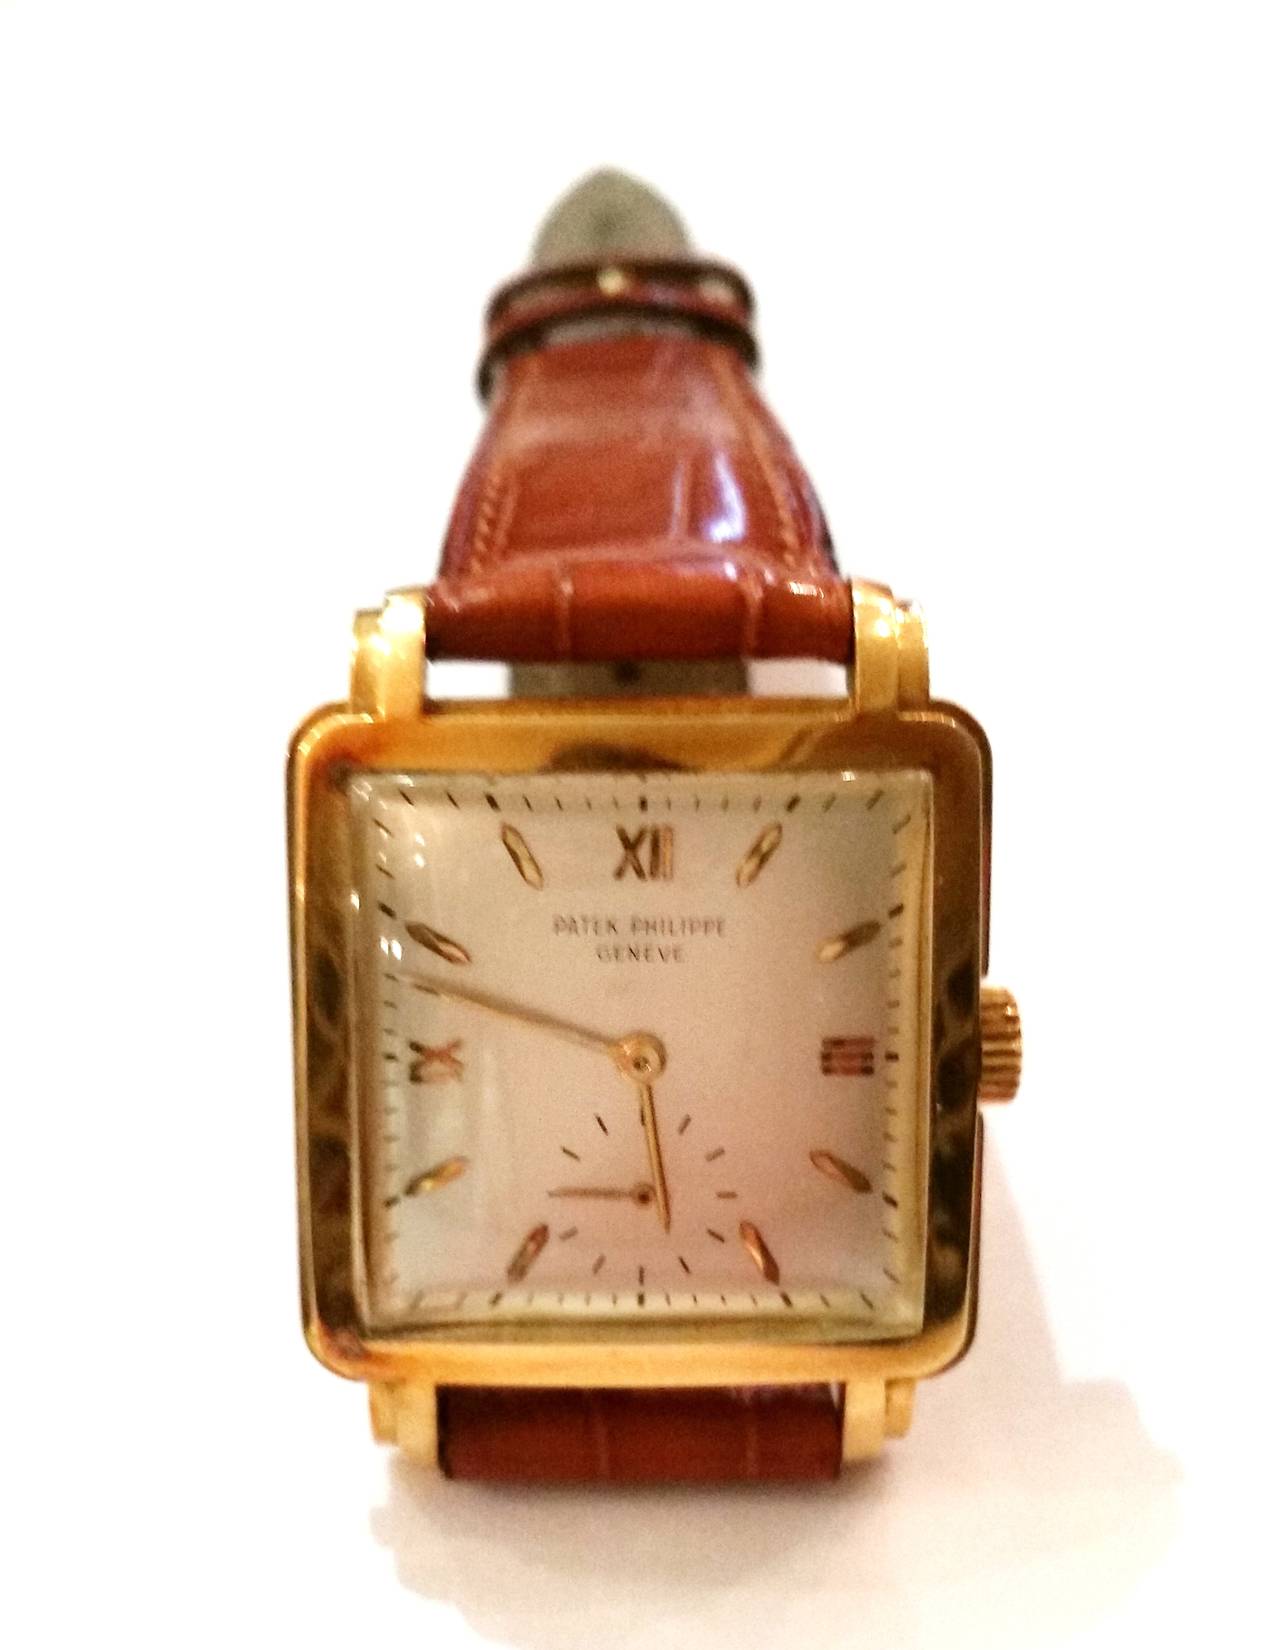 Patek Philippe ref. 2436
Mov. 958444
Cal. 10-200
In yellow gold